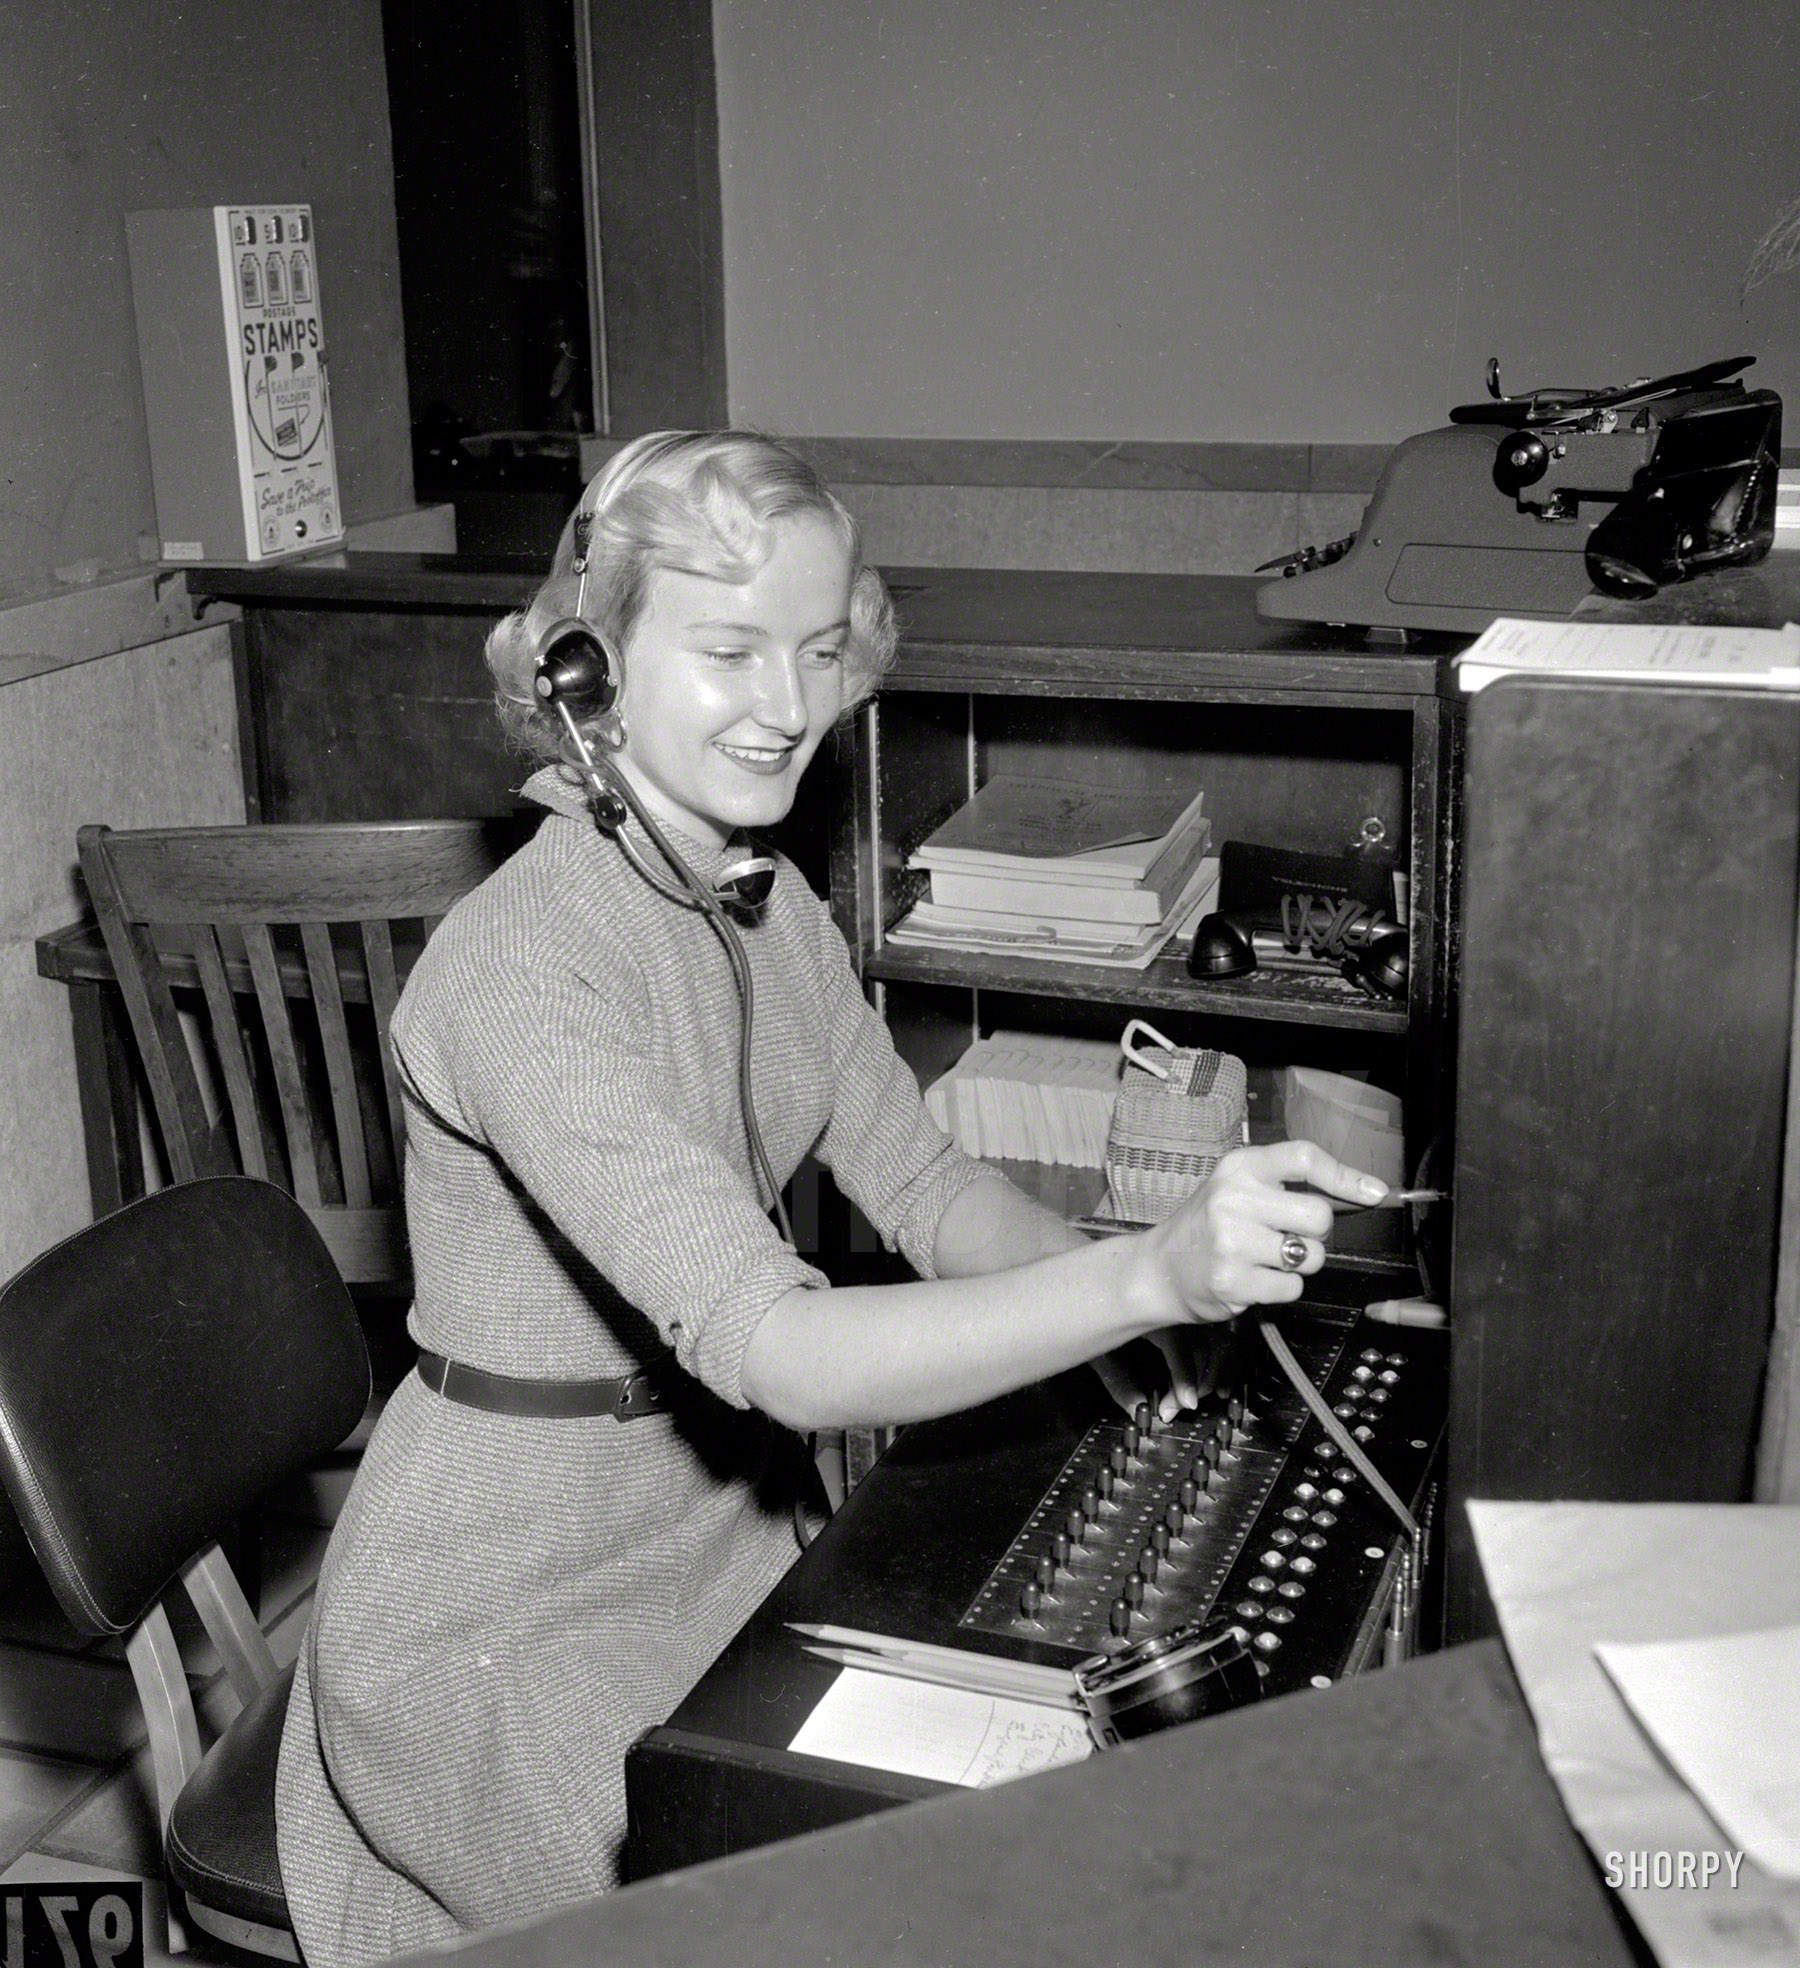 Circa 1955 in Columbus, Georgia. "Switchboard" is all it says here. Smile so they can hear it! 4x5 acetate negative from the News Archive. View full size.